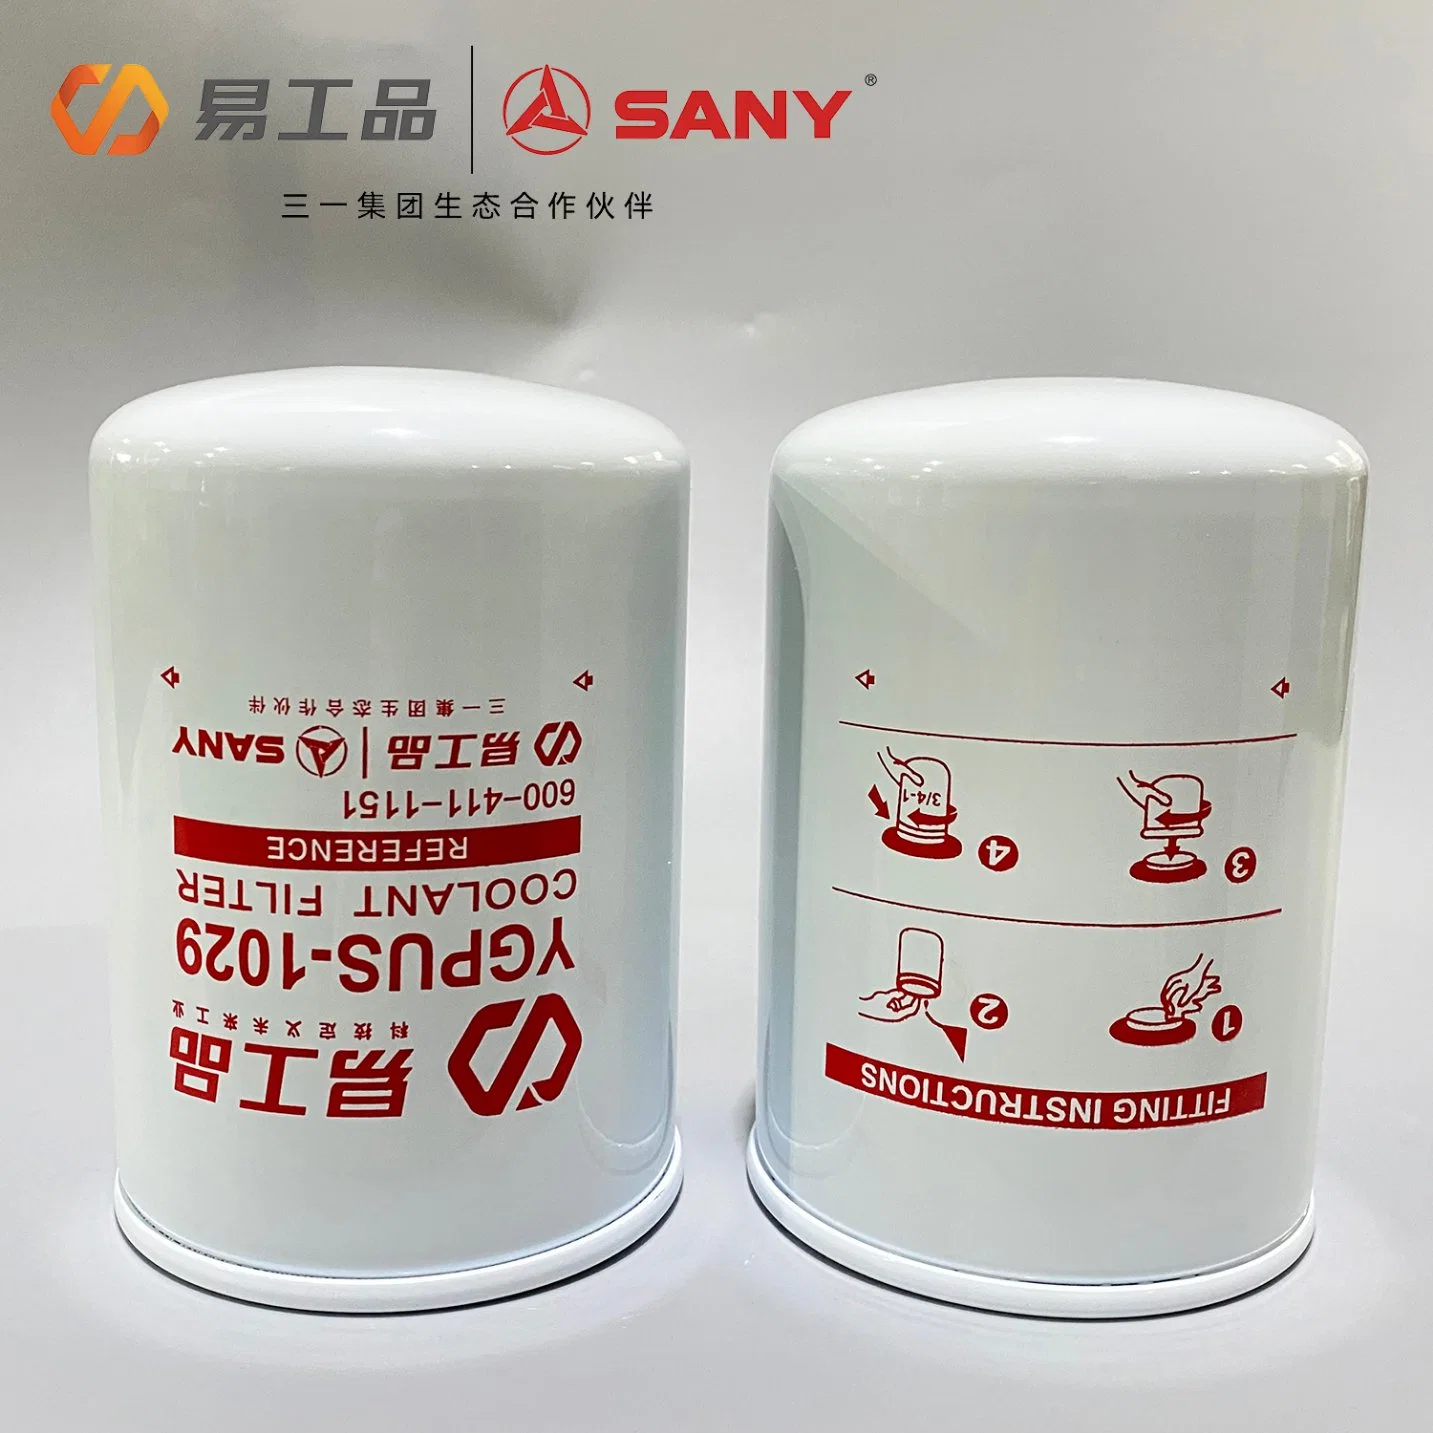 New Product All Kinds of Excavator Filter Element/ Oil Filter Air Filter Hydraulic Oil Absorption Filter /Suitable Model PC200-8mo PC210-8mo PC220-8mo